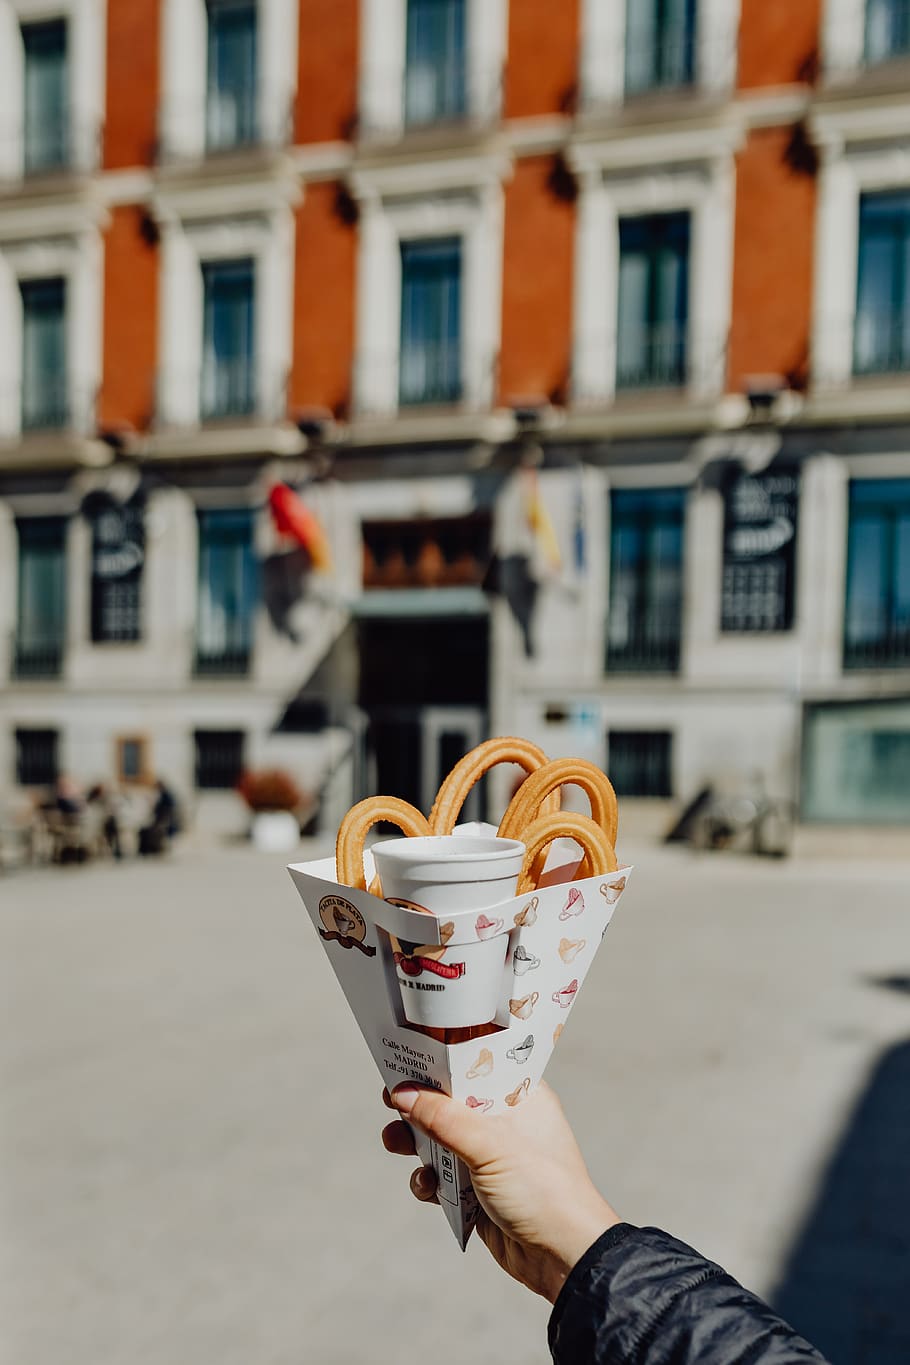 church, chocolate, madrid, spain, dessert, delicious, traditional, Churros, cup, hot